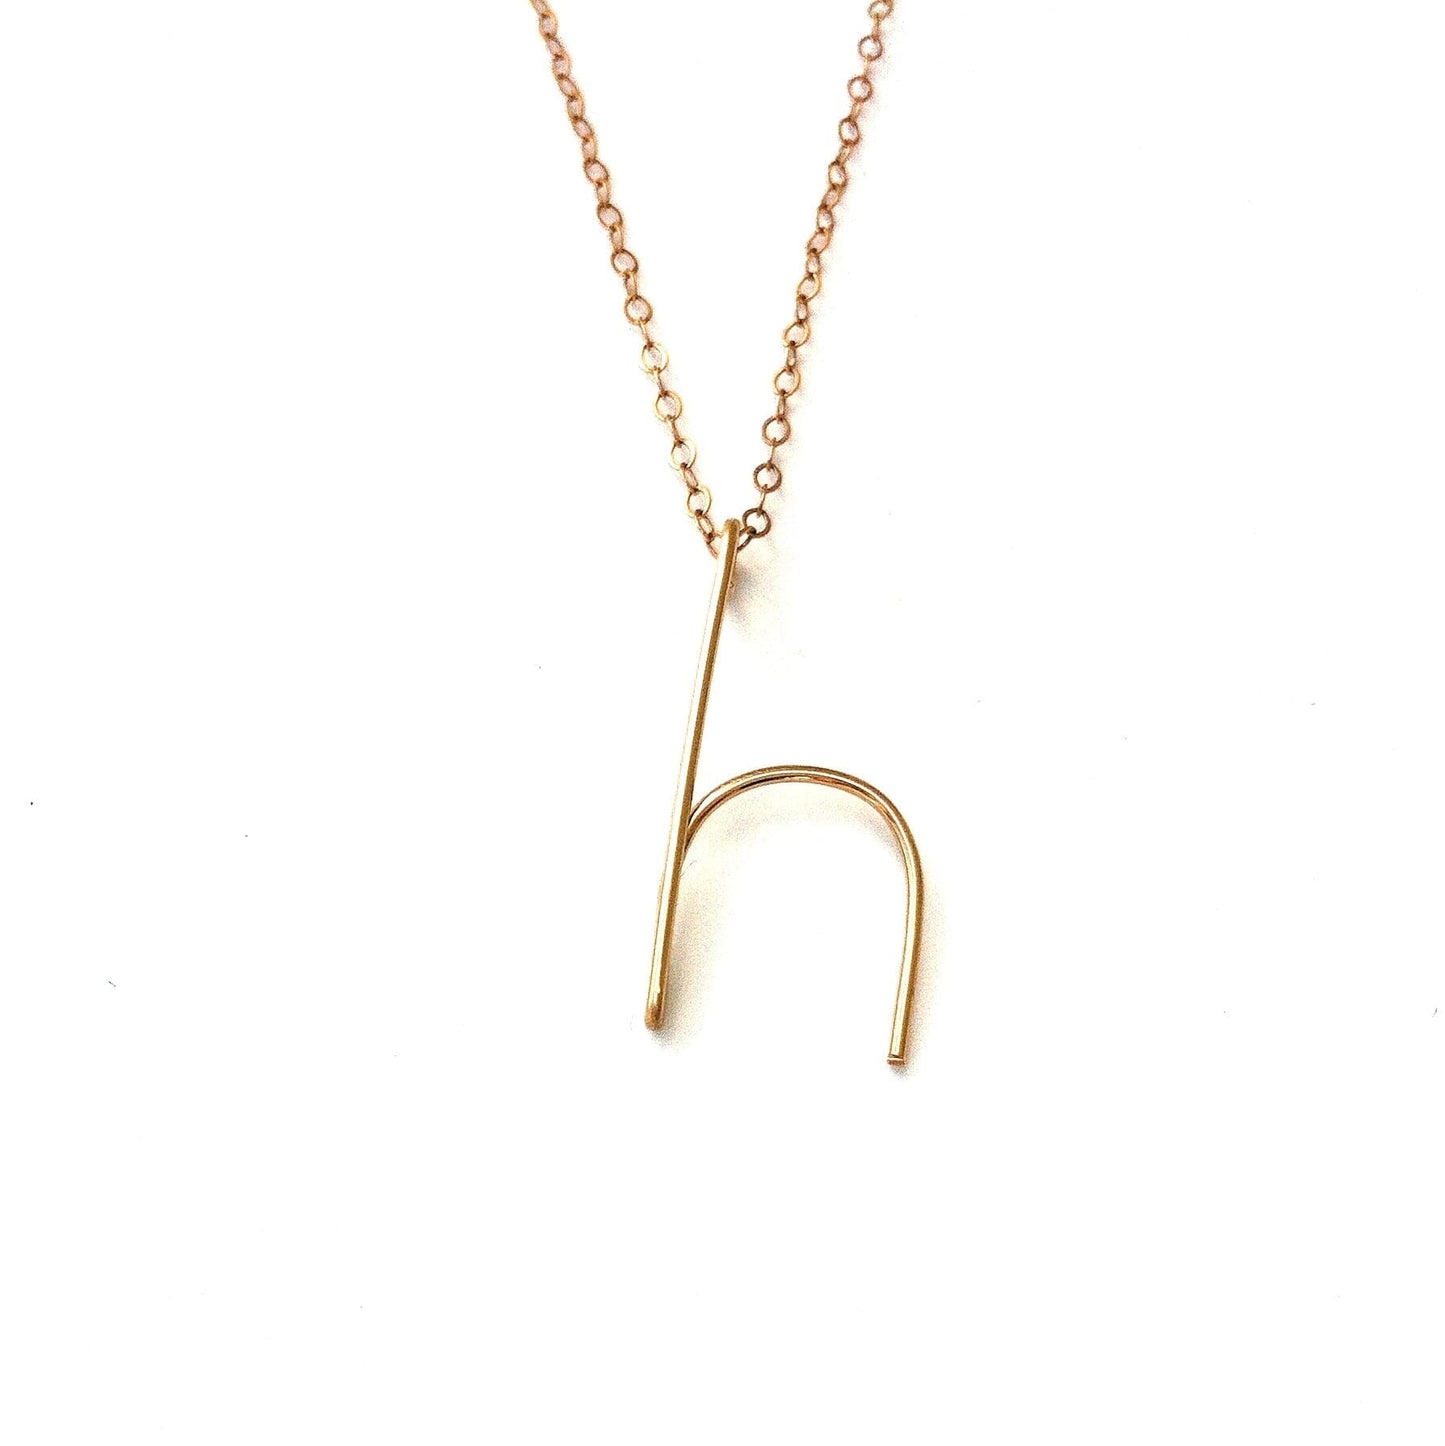 Handmade Initial Necklace Robyn Canady h 14K Gold Filled 